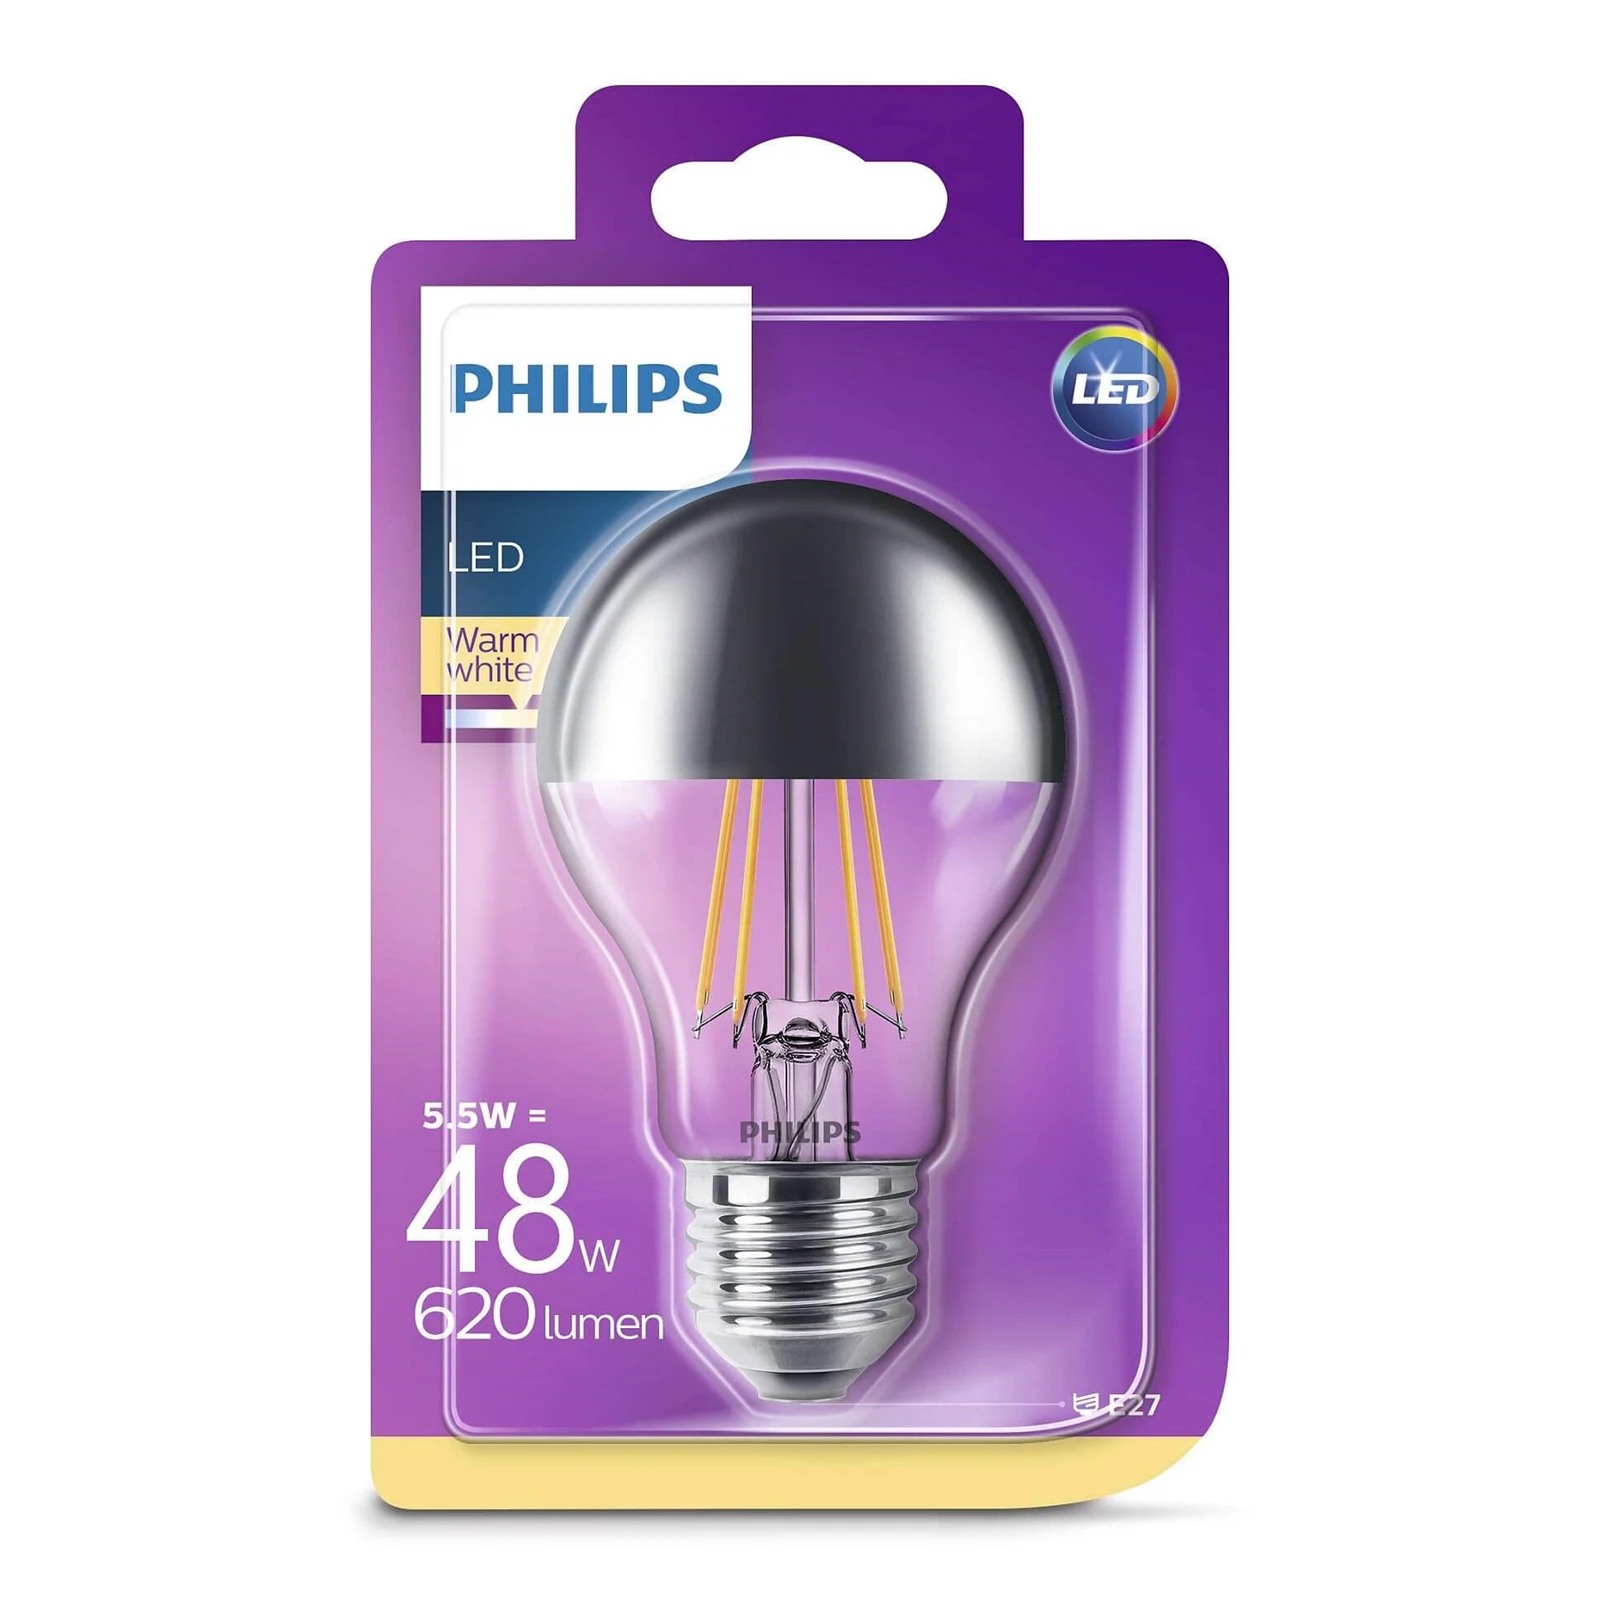 Bulb LED 7,2W Filament Top-Mirrored (650lm) E27 - Philips - Buy online